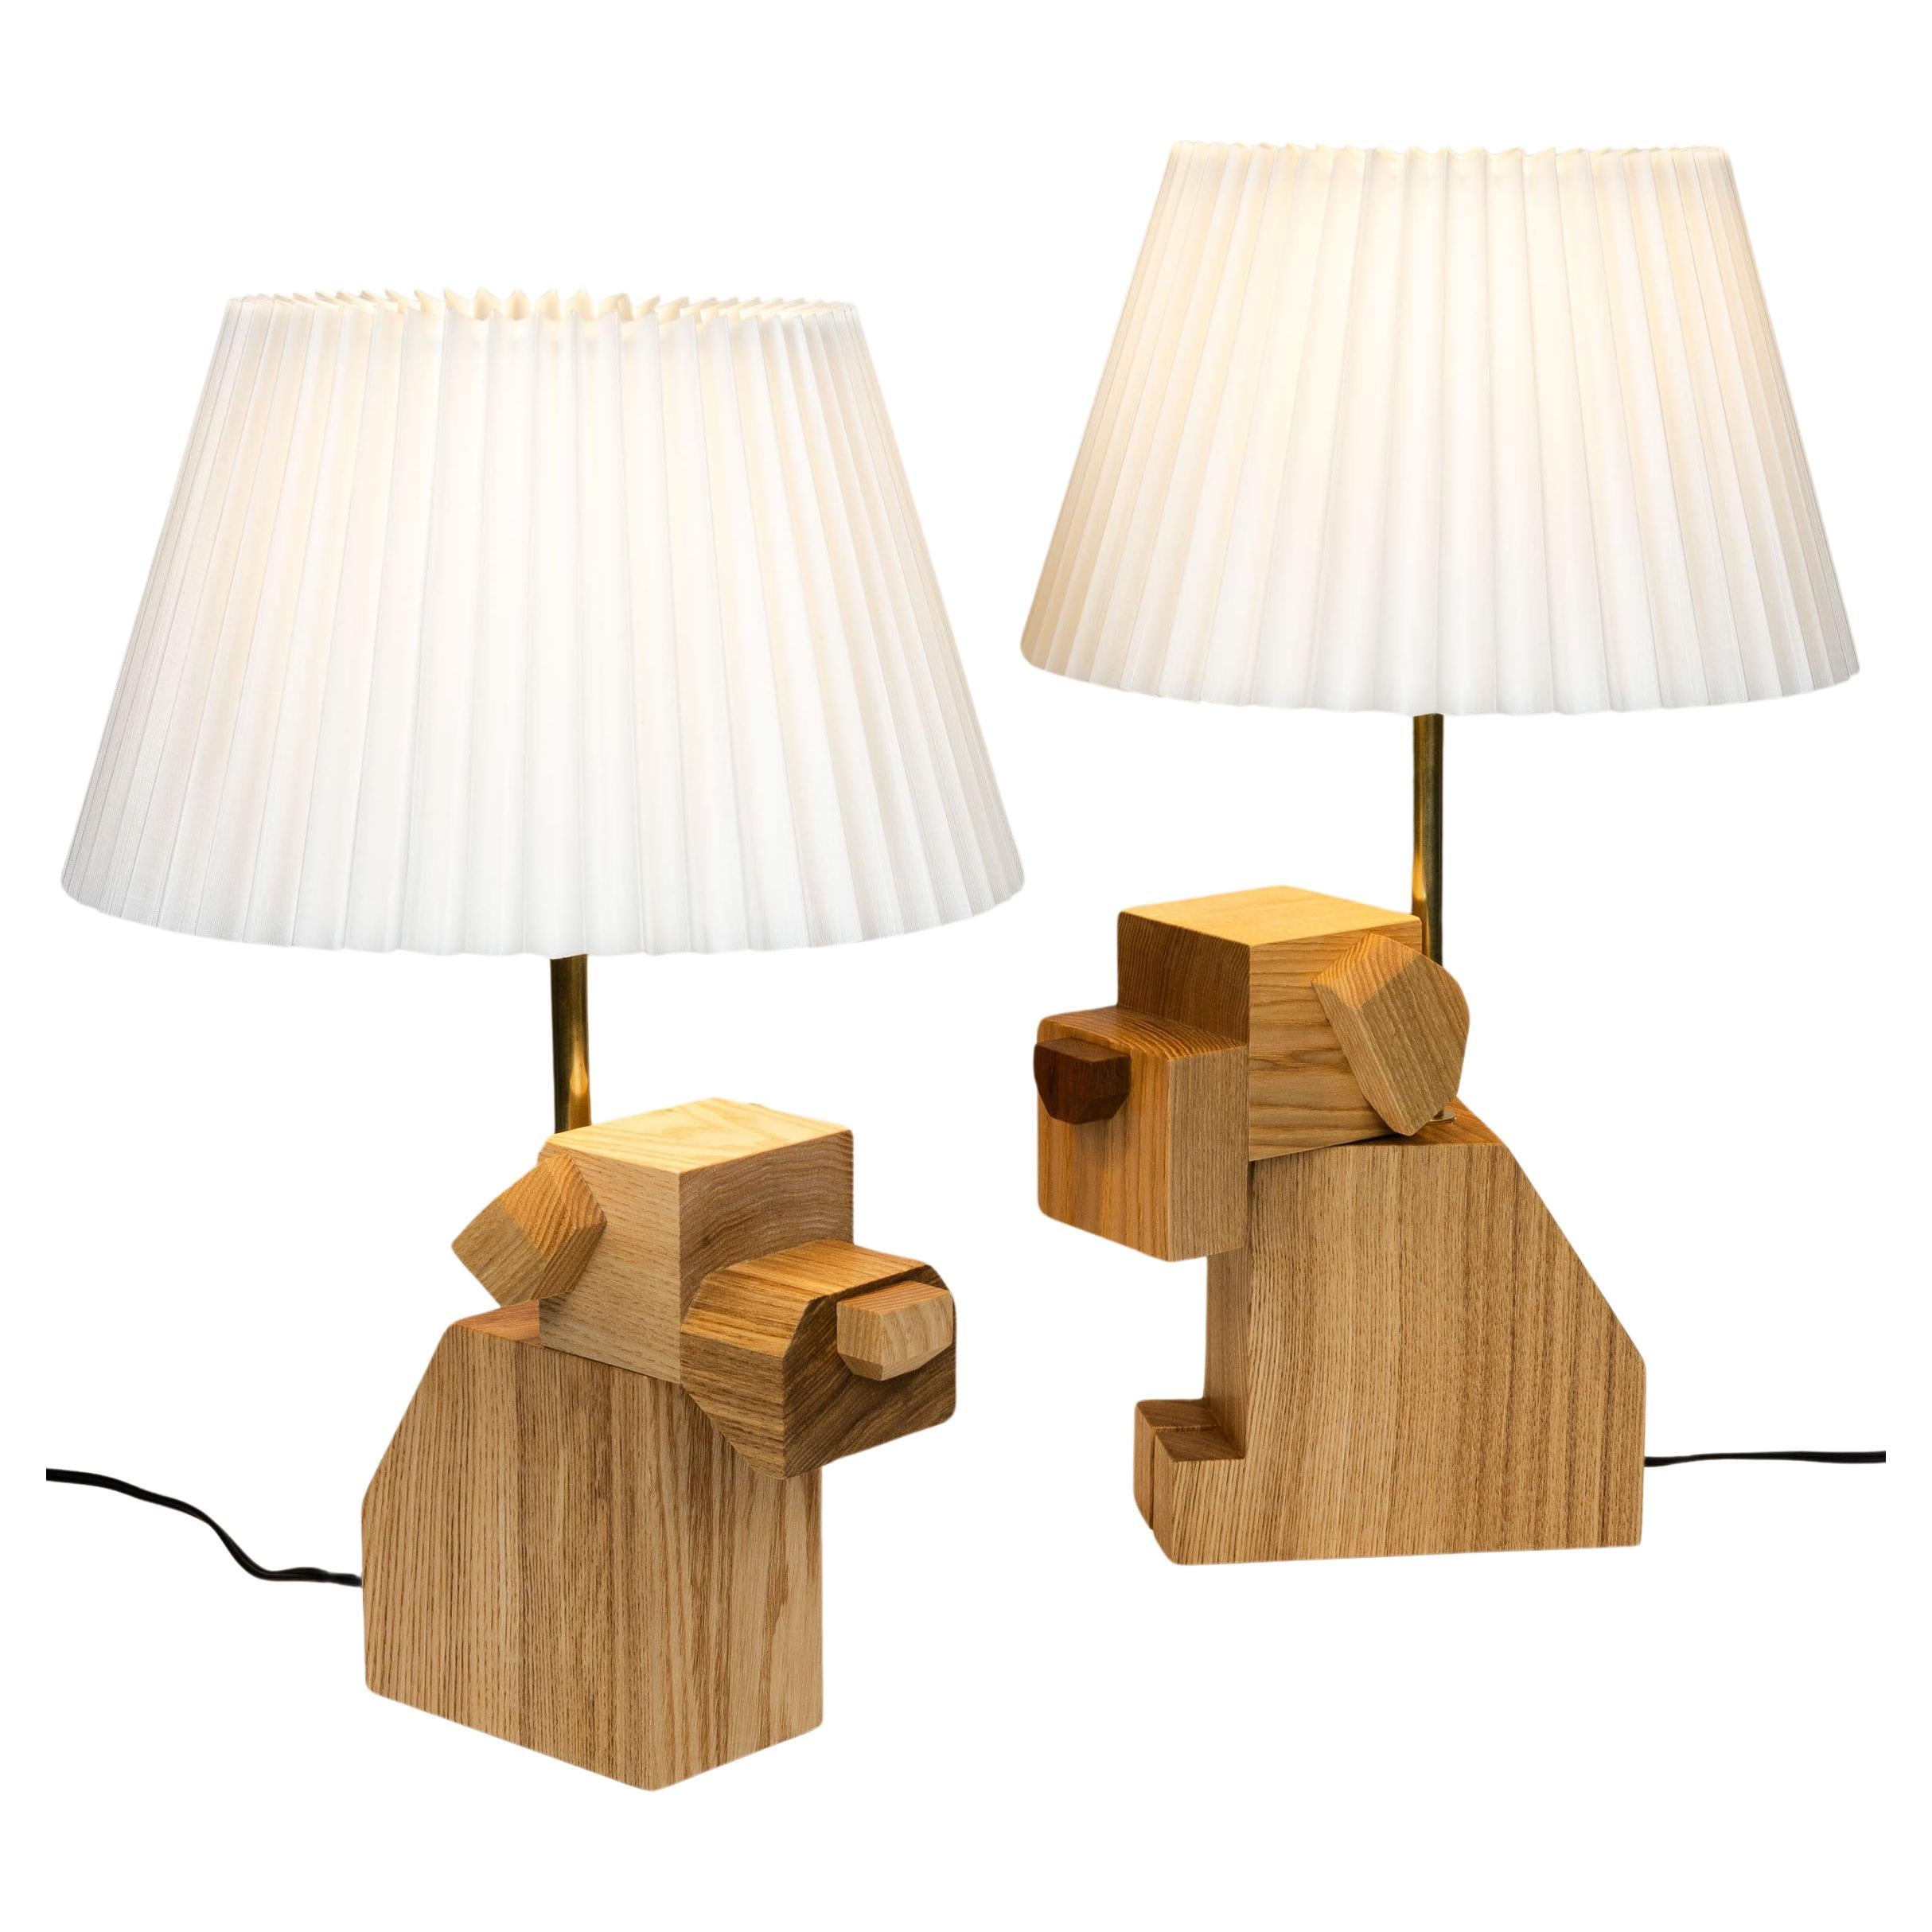 Pair of Wood Dog Table Lamps with White Fabric Shades, hand-crafted, hardwood